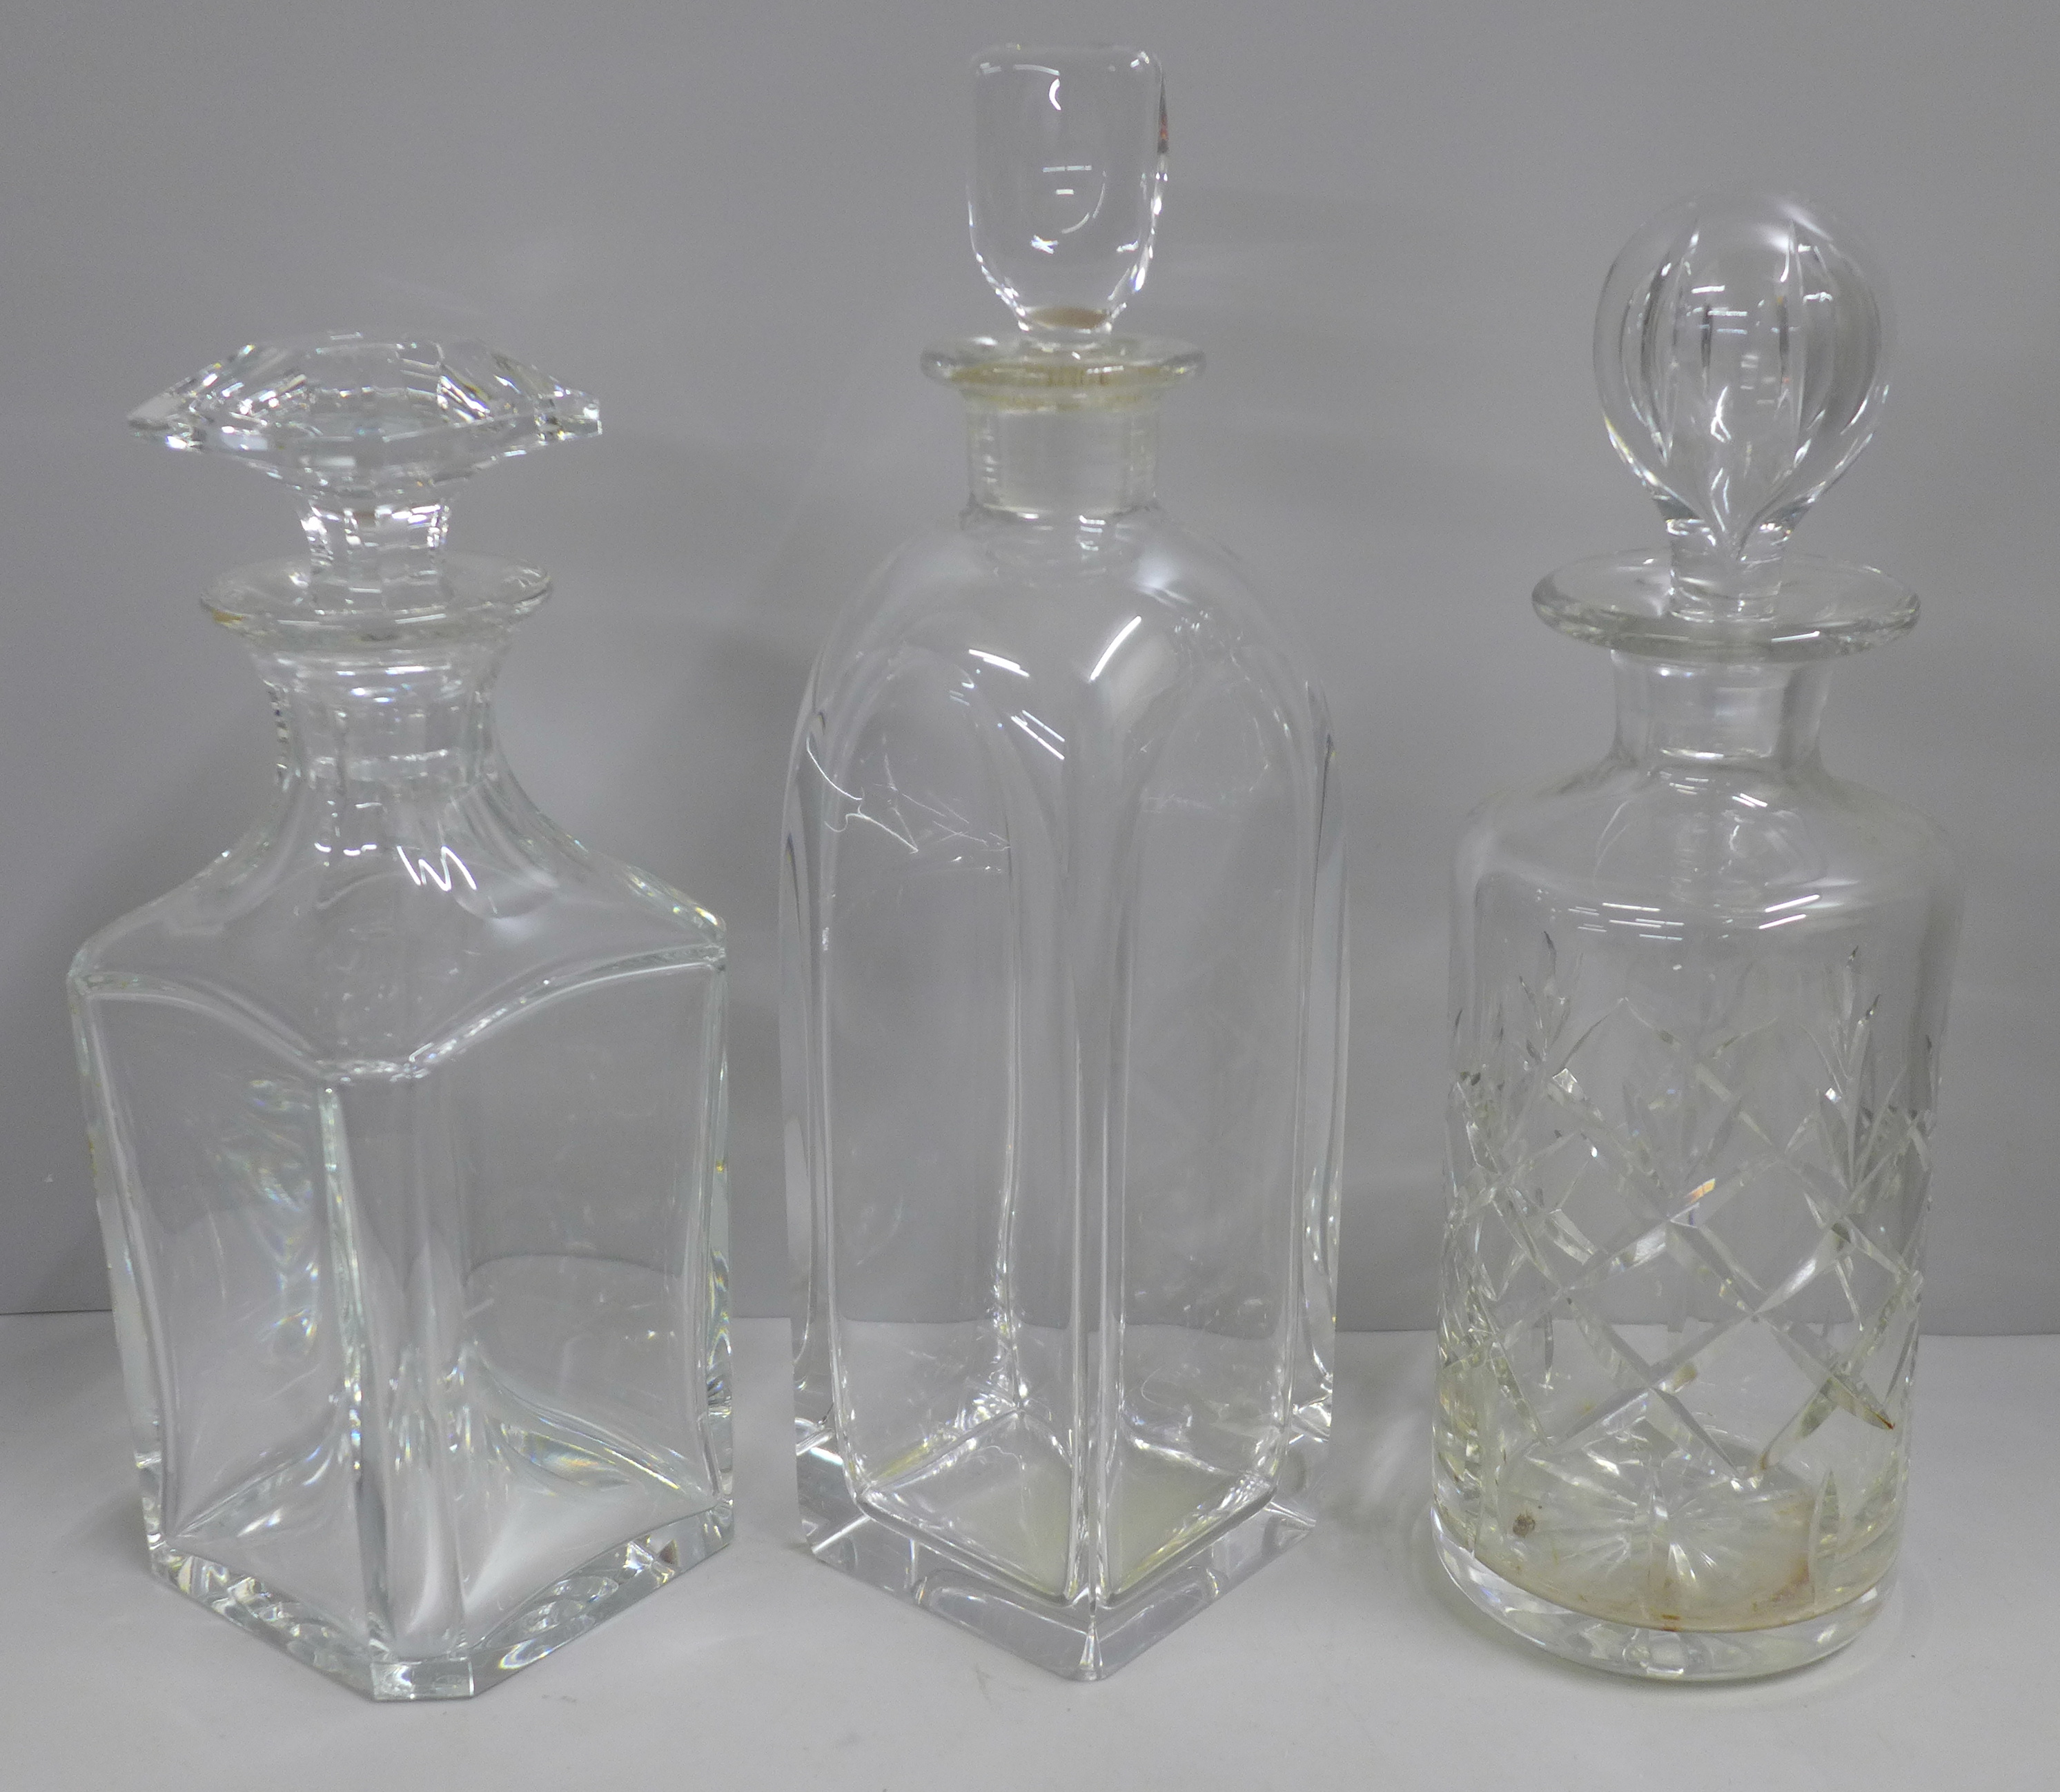 Three decanters; Baccarat, Orrefors and one other